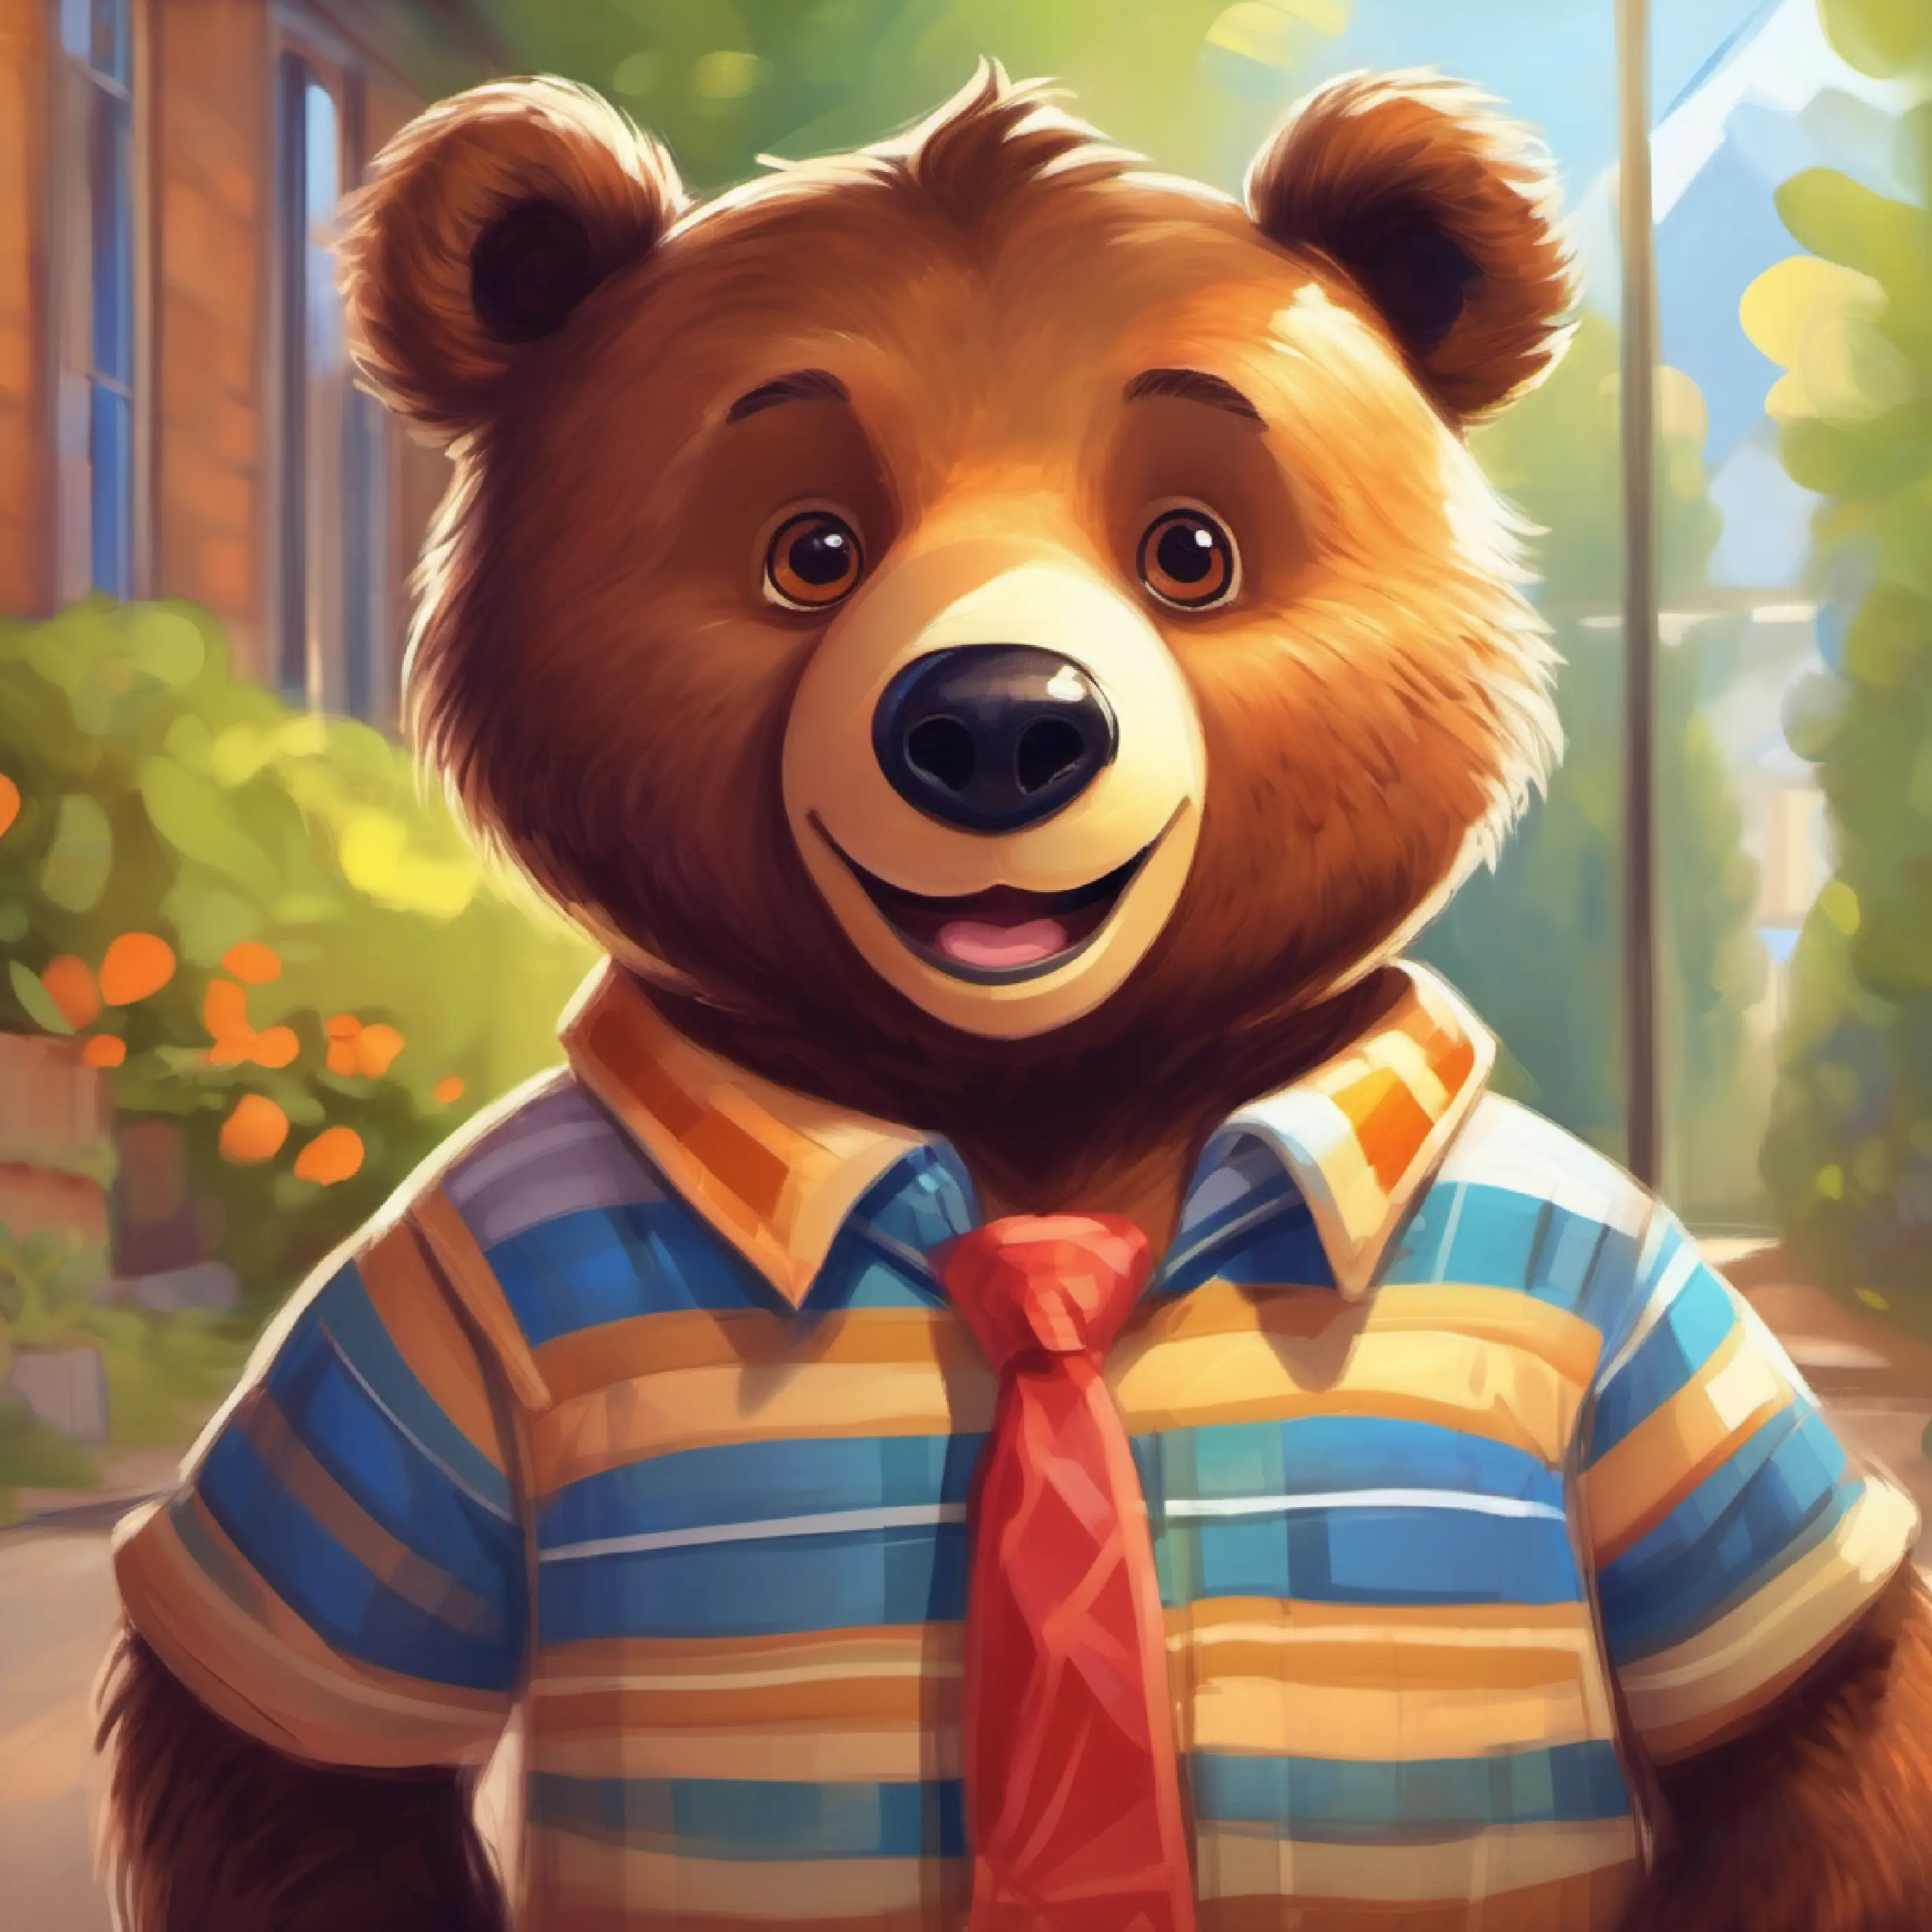 Brown bear with a bright smile and a striped shirt, brown eyes reflects on his first day at school.